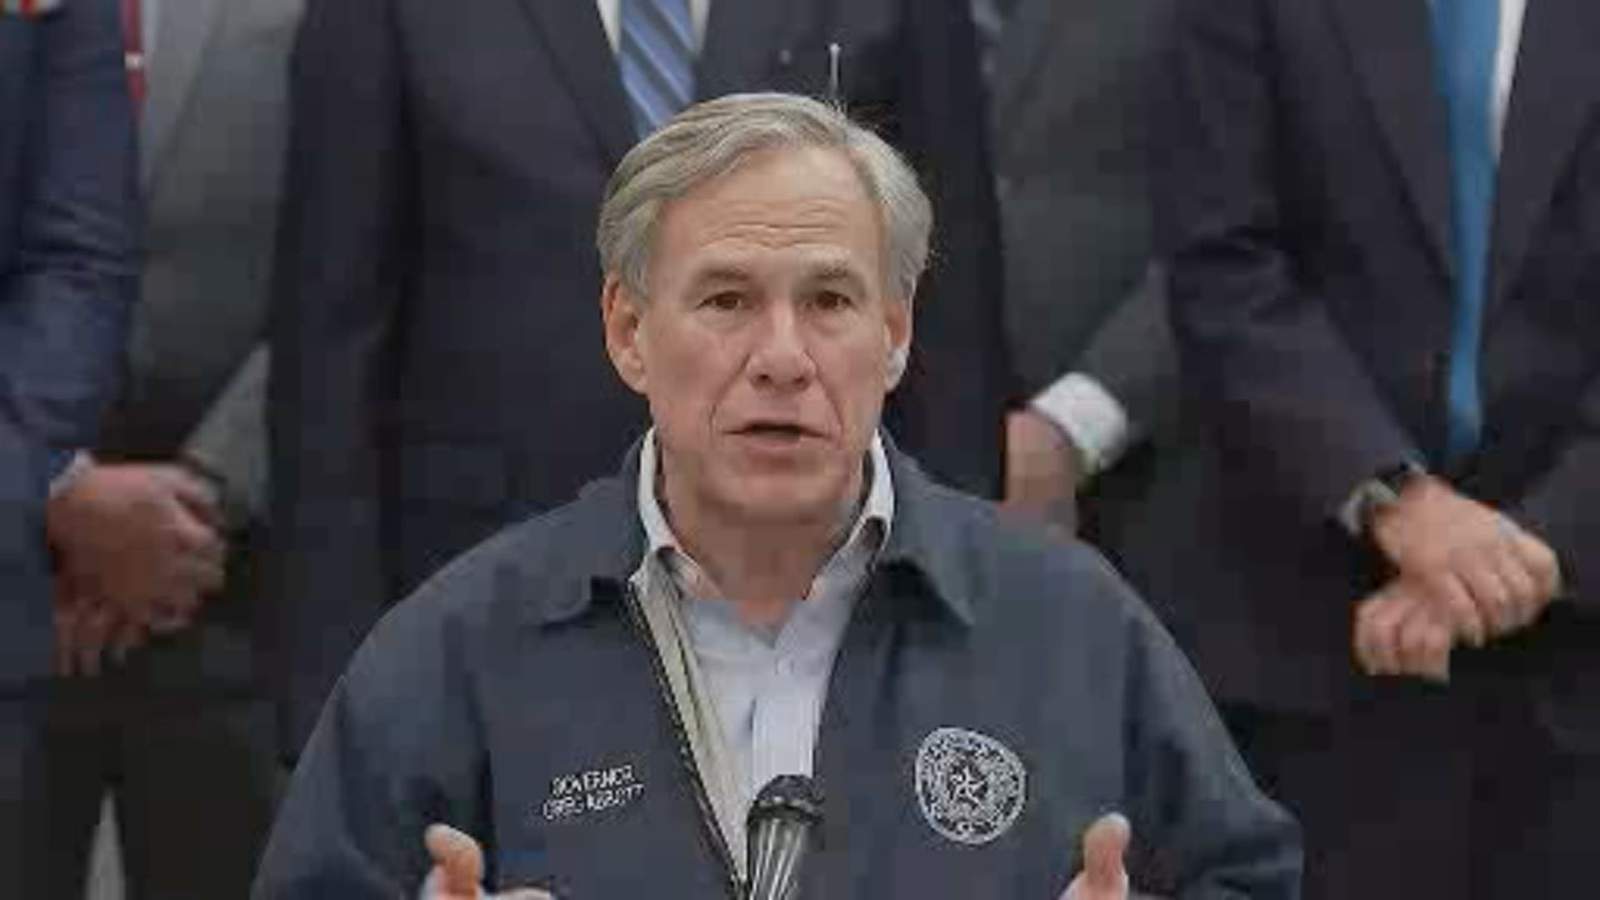 Gov. Greg Abbott discusses possibility of deploying Texas National Guard across state on Election Day